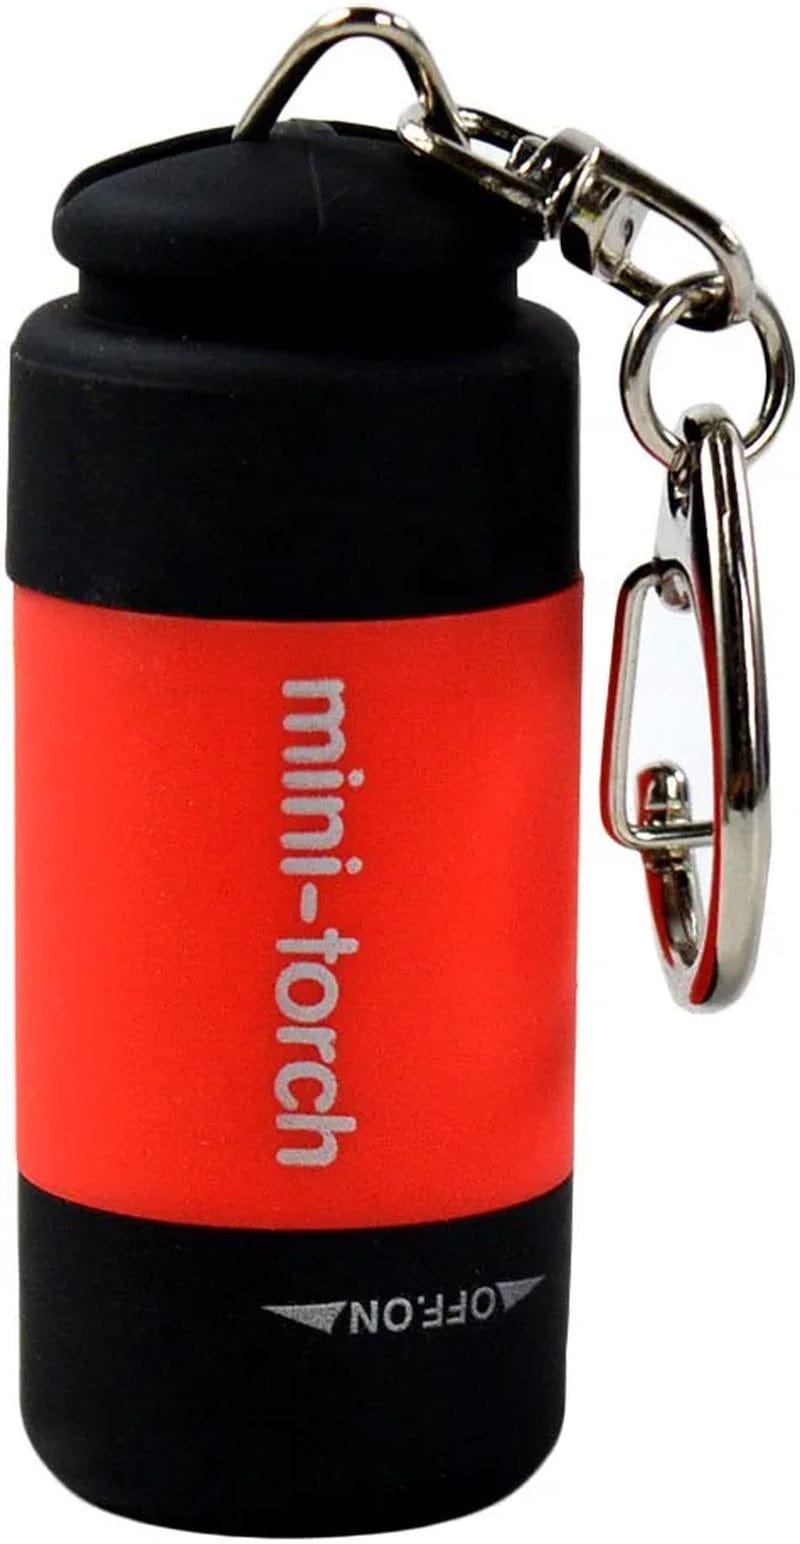 ZOANCC Small LED Torch, Mini Torch Flashlight Keyring Rechargeable Keyring Torch USB Tiny Pocket Torchlight Waterproof Torches Lamp Portable Keychain Torch Light for Outdoors Emergency (Yellow) Hardware > Tools > Flashlights & Headlamps > Flashlights ZOANCC Red  